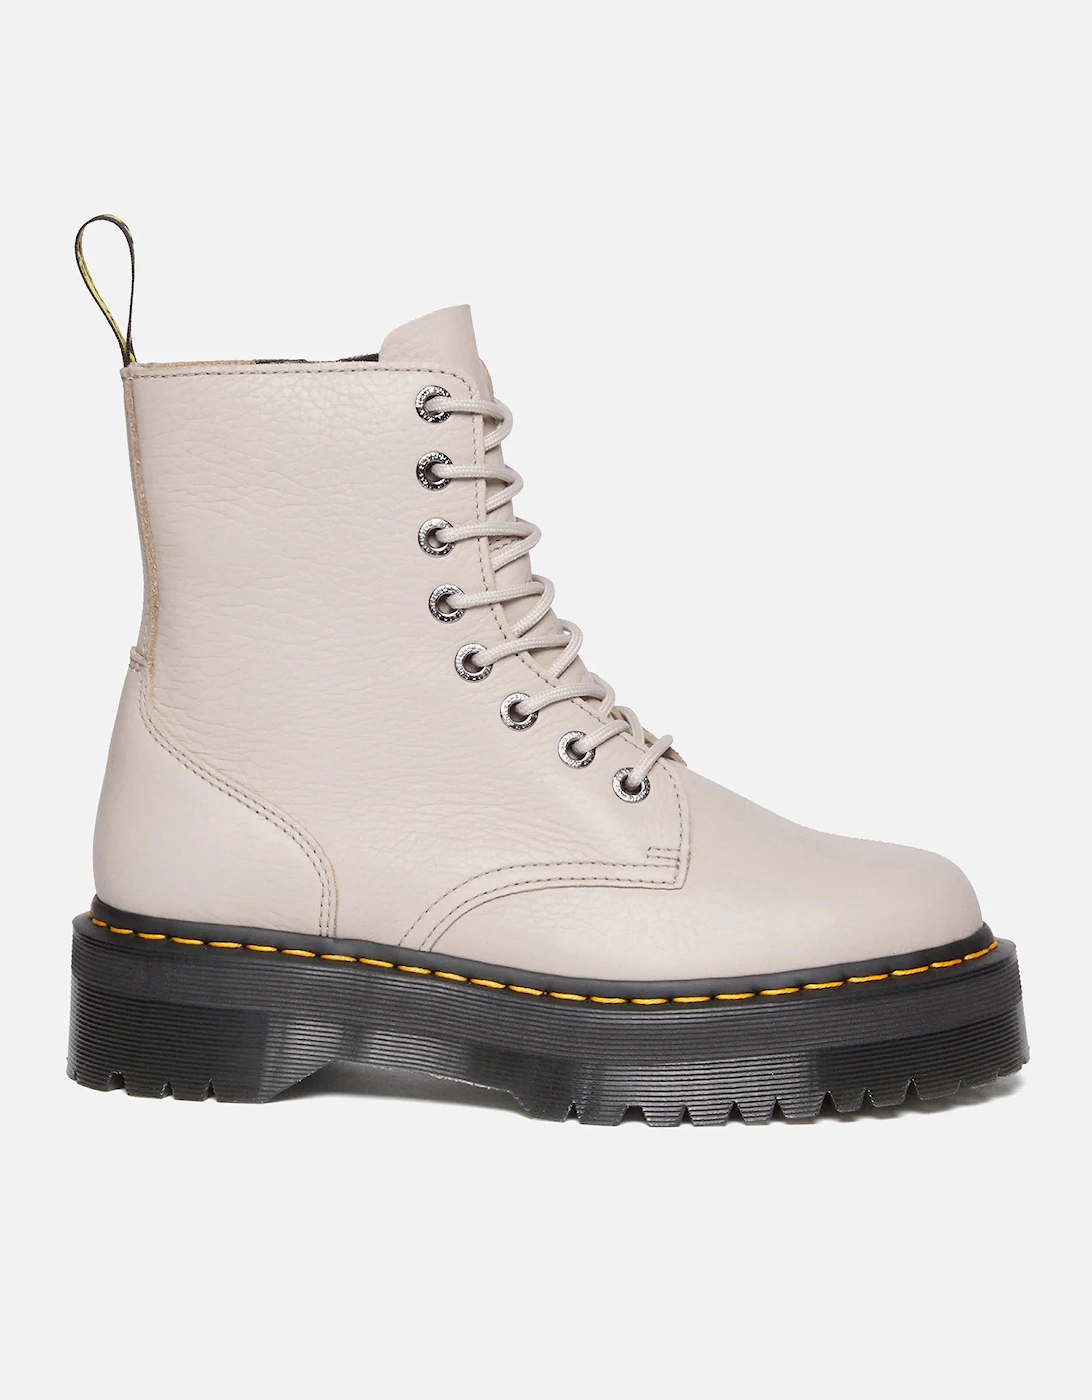 Dr. Martens Women's Jadon Leather 8-Eye Boots - Dr. Martens - Home - Dr. Martens Women's Jadon Leather 8-Eye Boots, 2 of 1